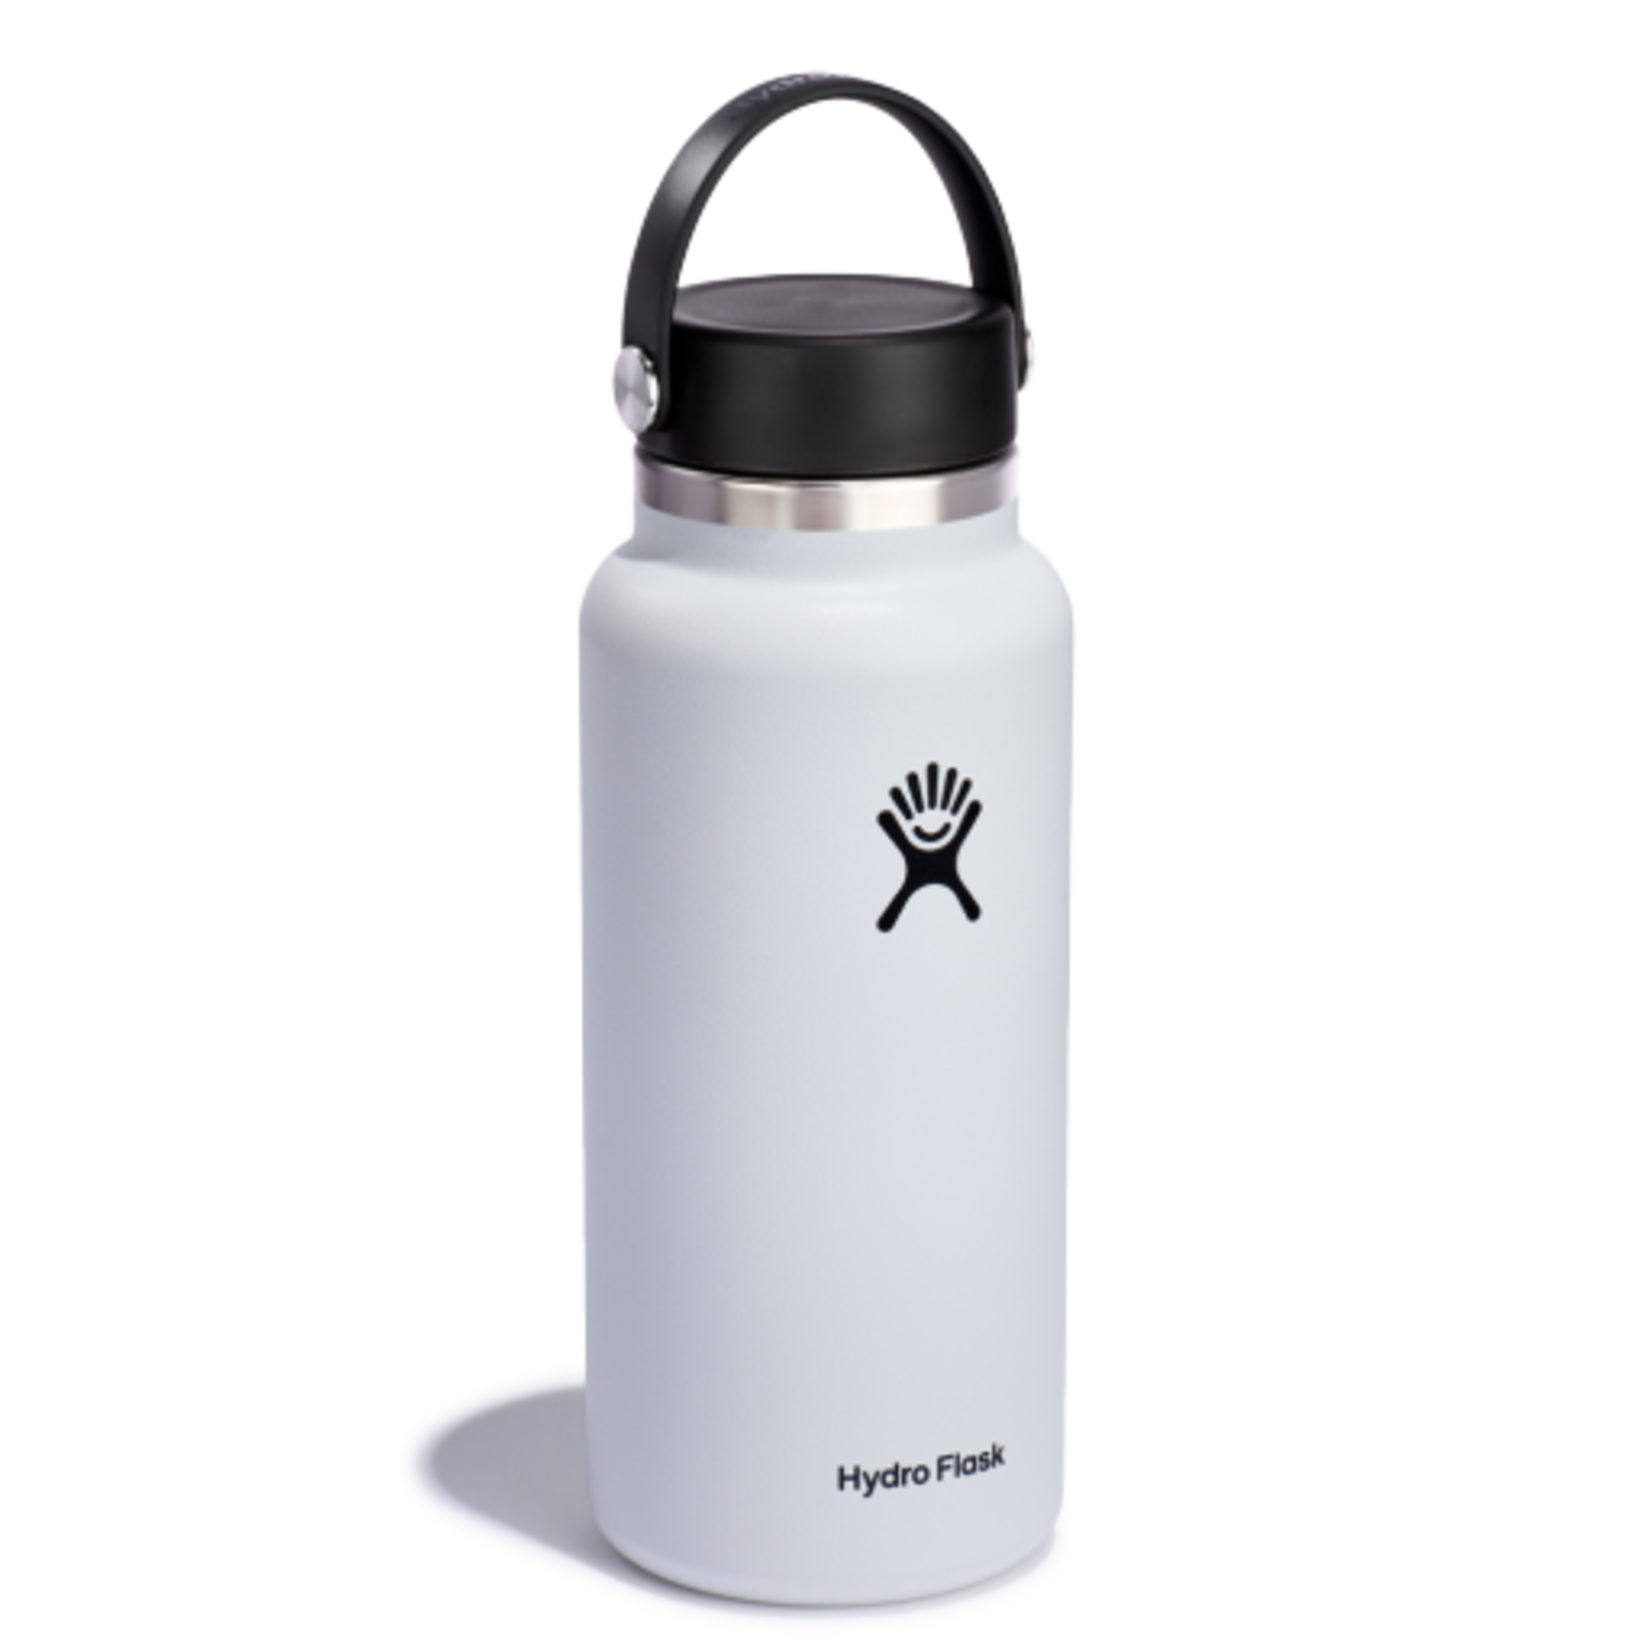 Hydro Flask US/ROW 32 OZ WIDE MOUTH 2.0 FLEX CAP in WHITE